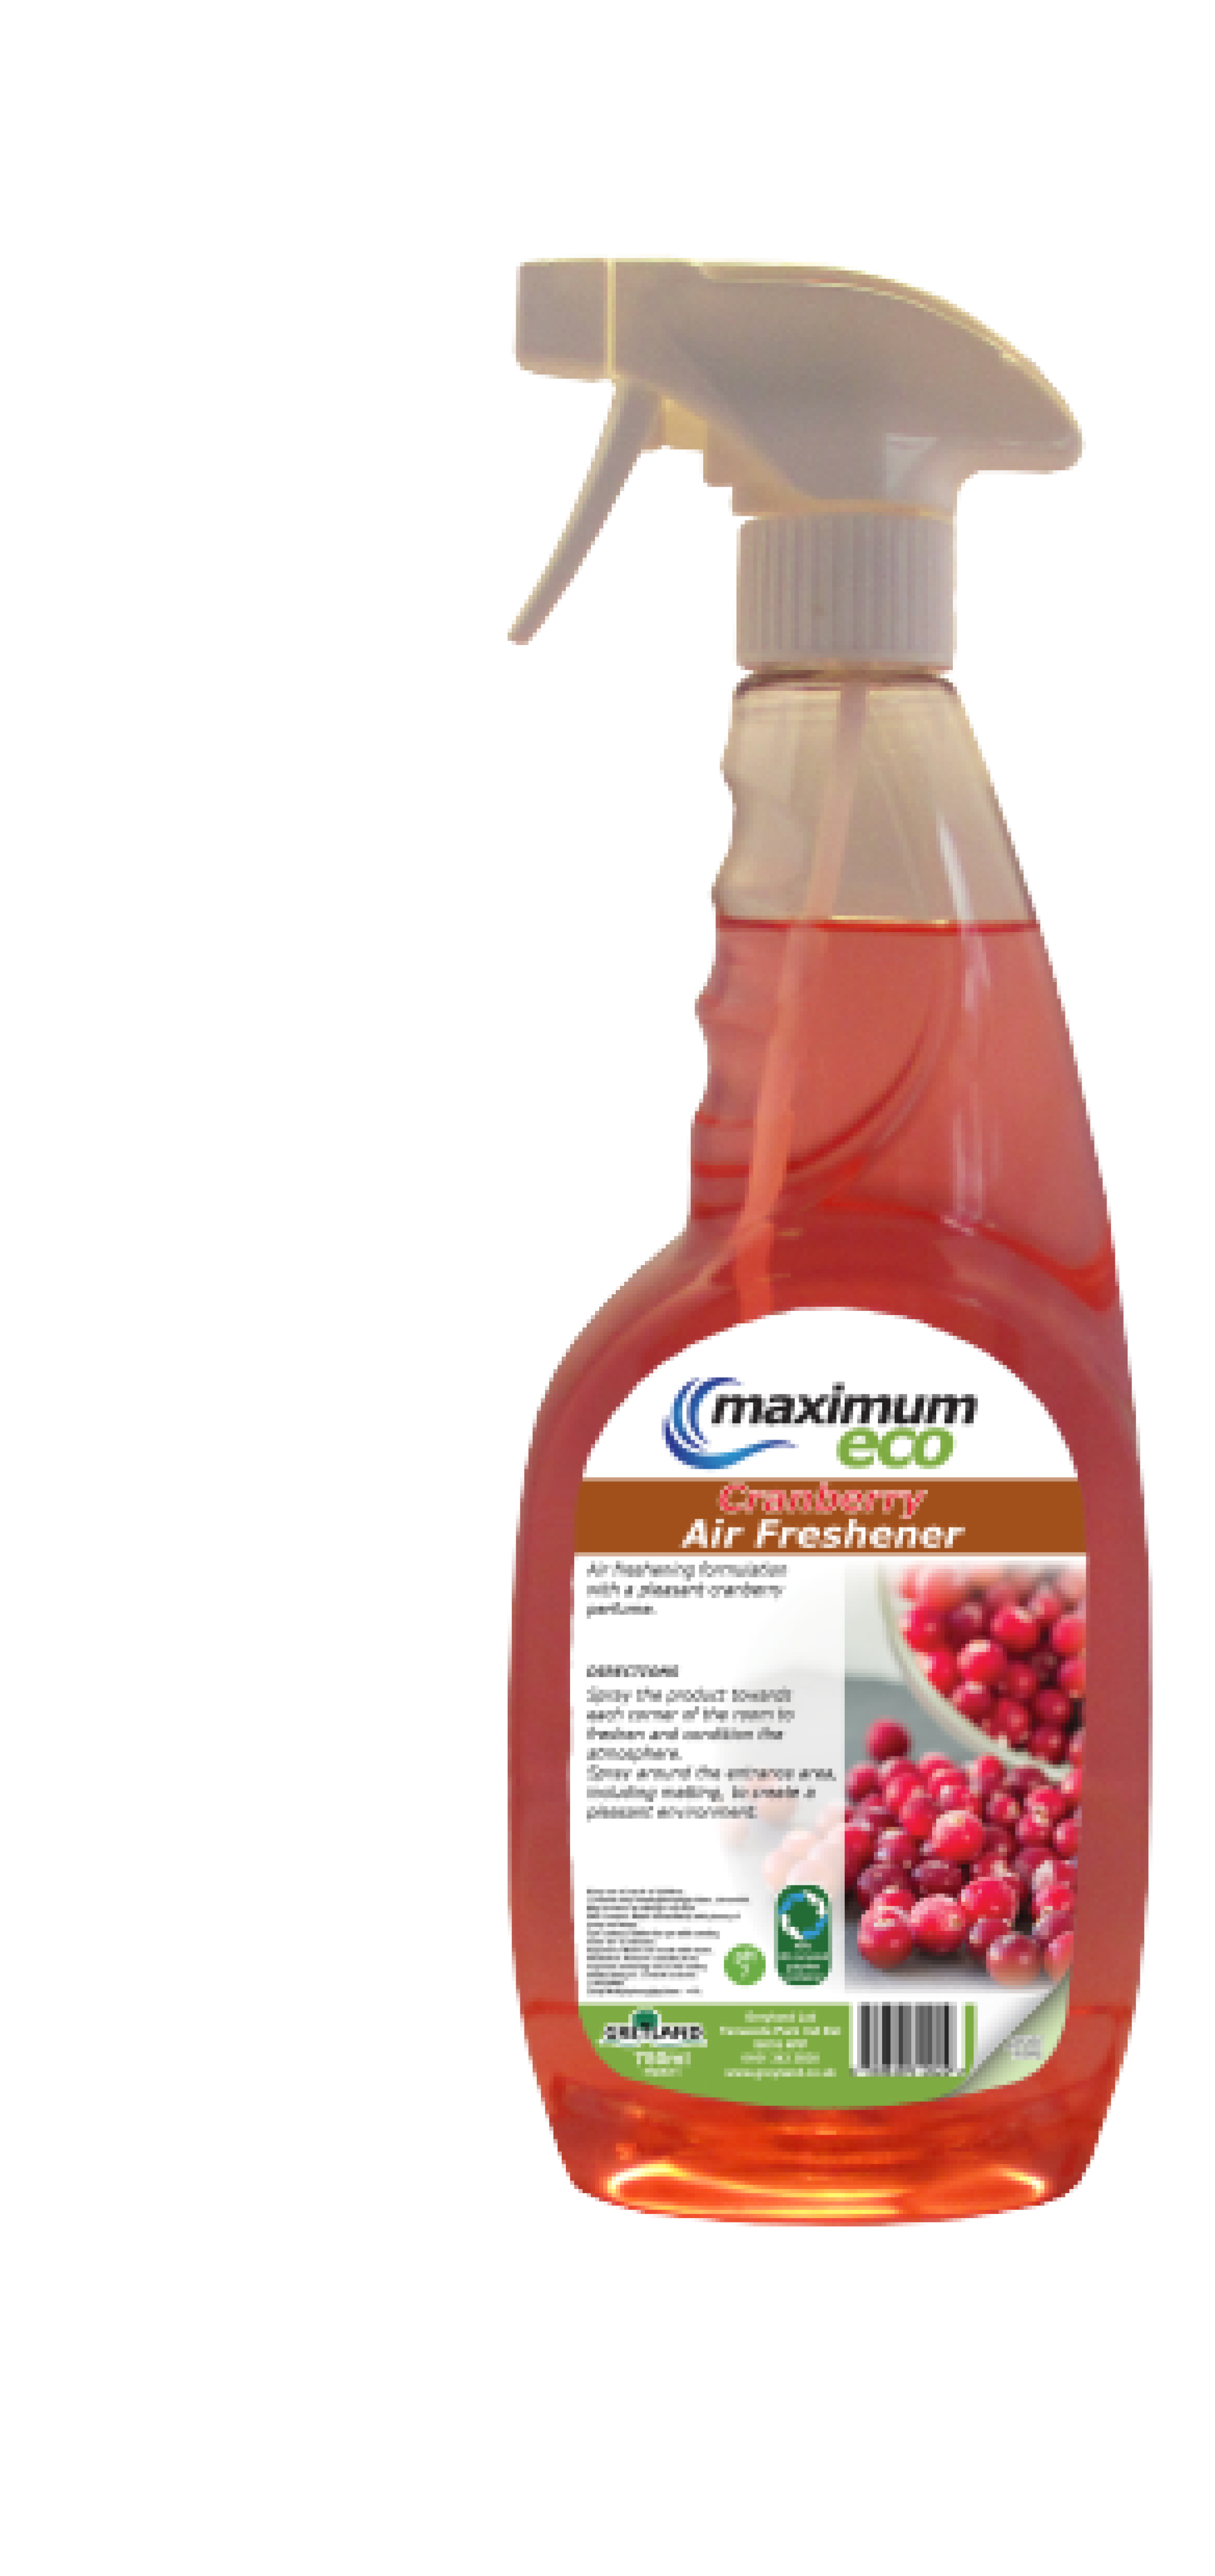 Cranberry_Air_Freshener_750ml-removebg-preview.png